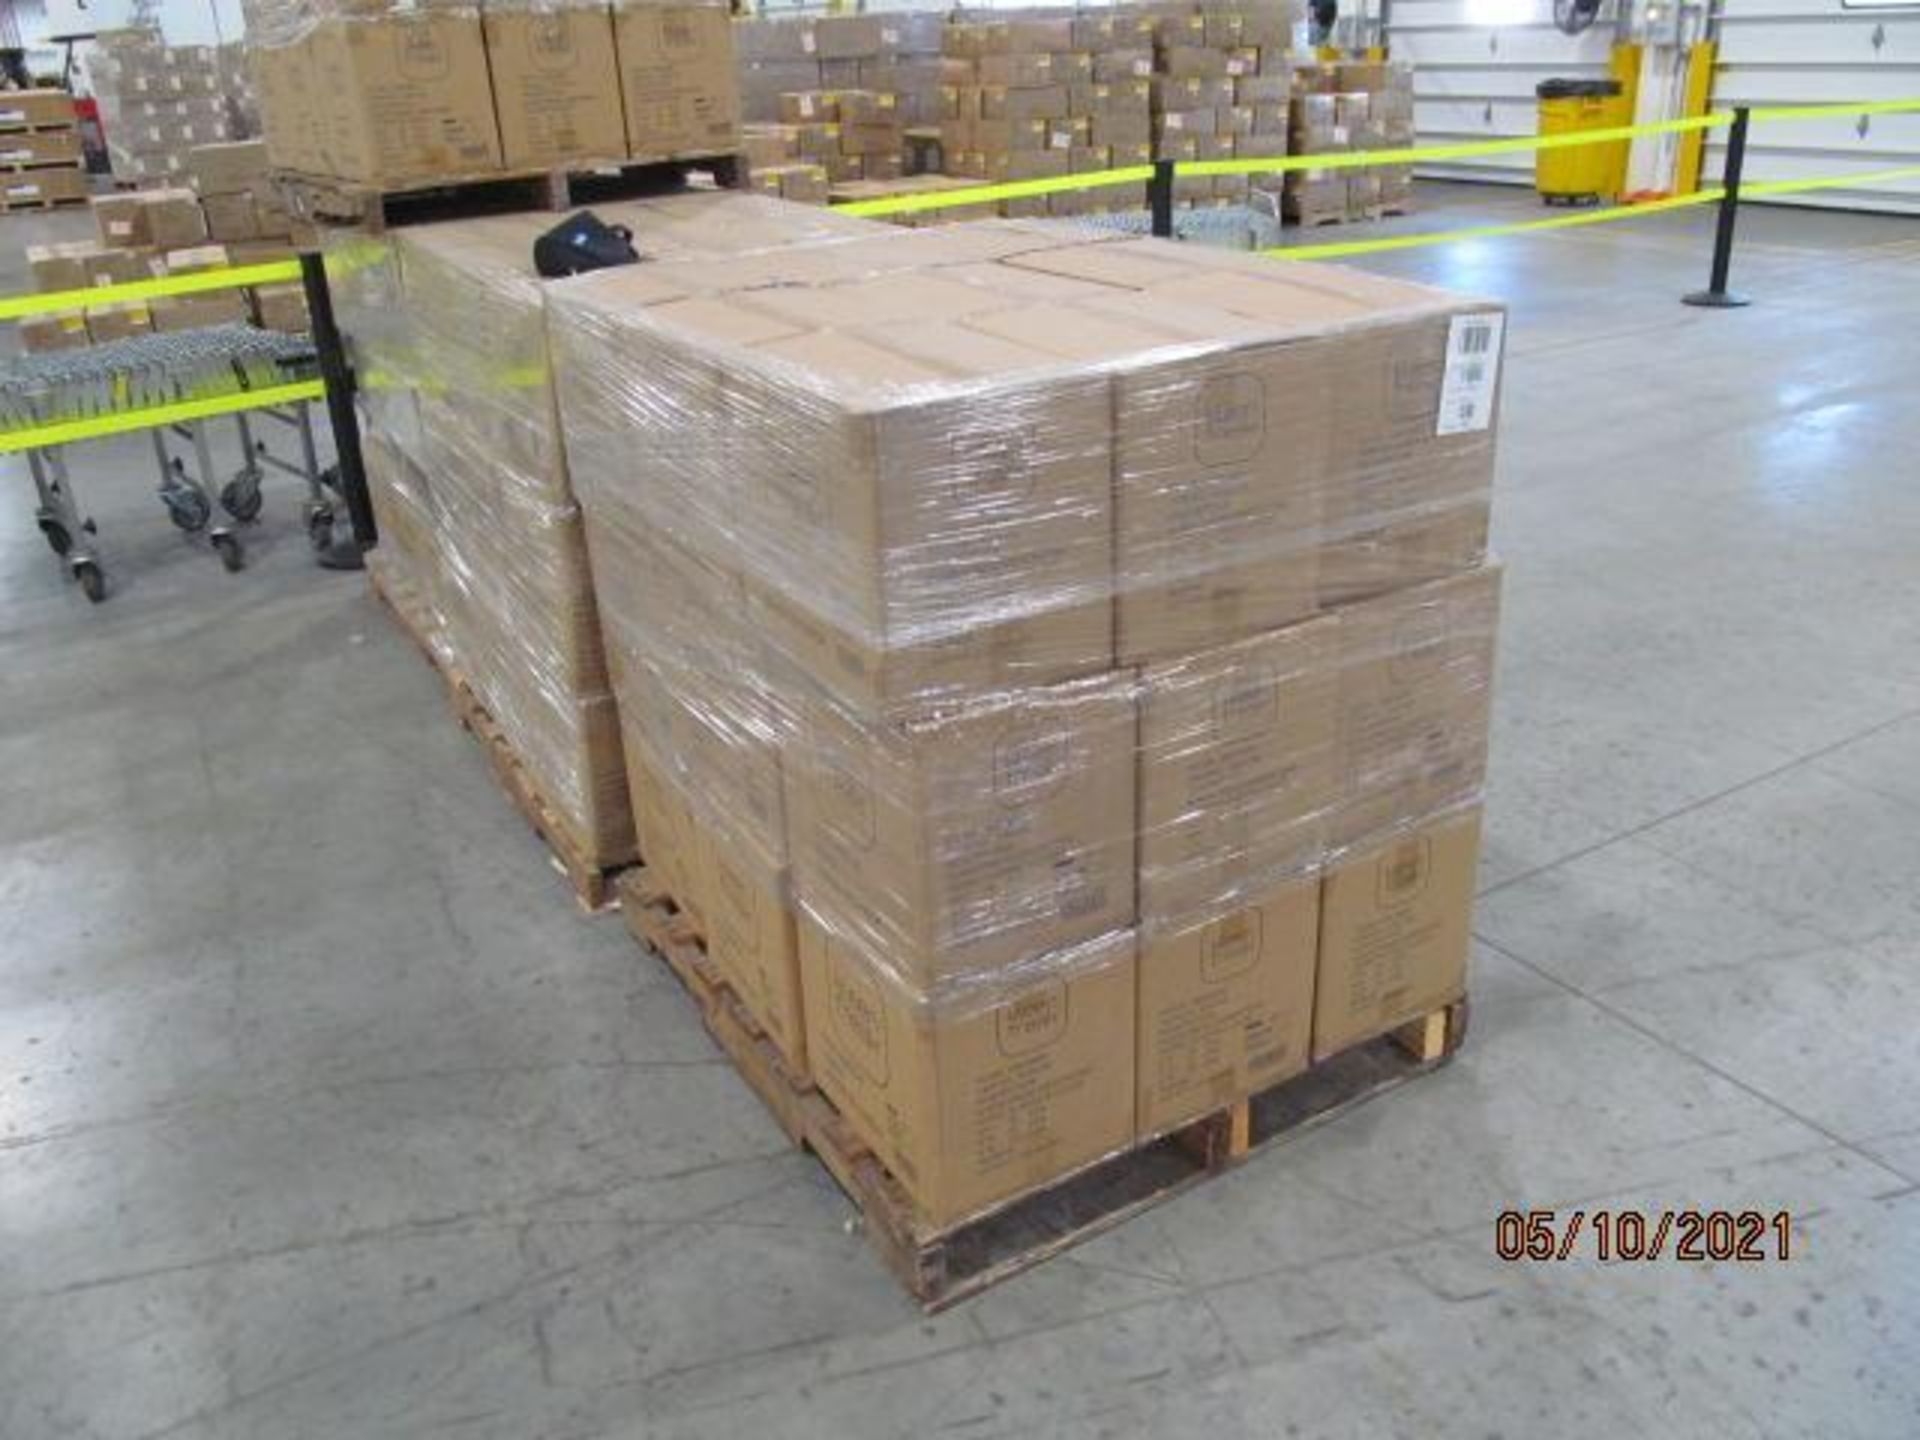 Lot of Waxman Kleen Freak Sanitizing Wipes consisting of 12,960 packages on 20 pallets. Each package - Image 7 of 11